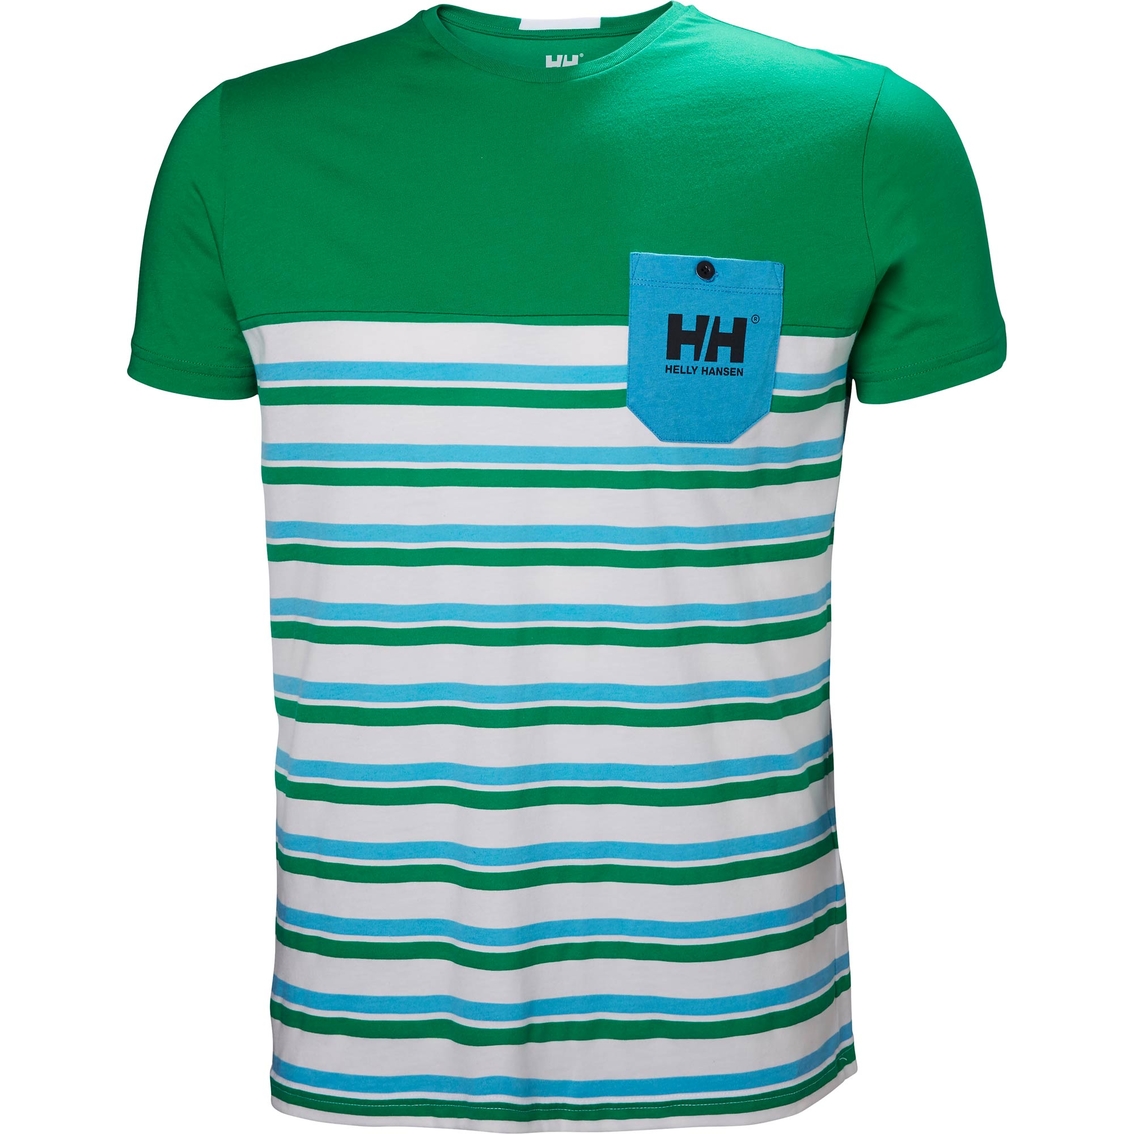 Helly Hansen Fjord Tee - Image 3 of 3